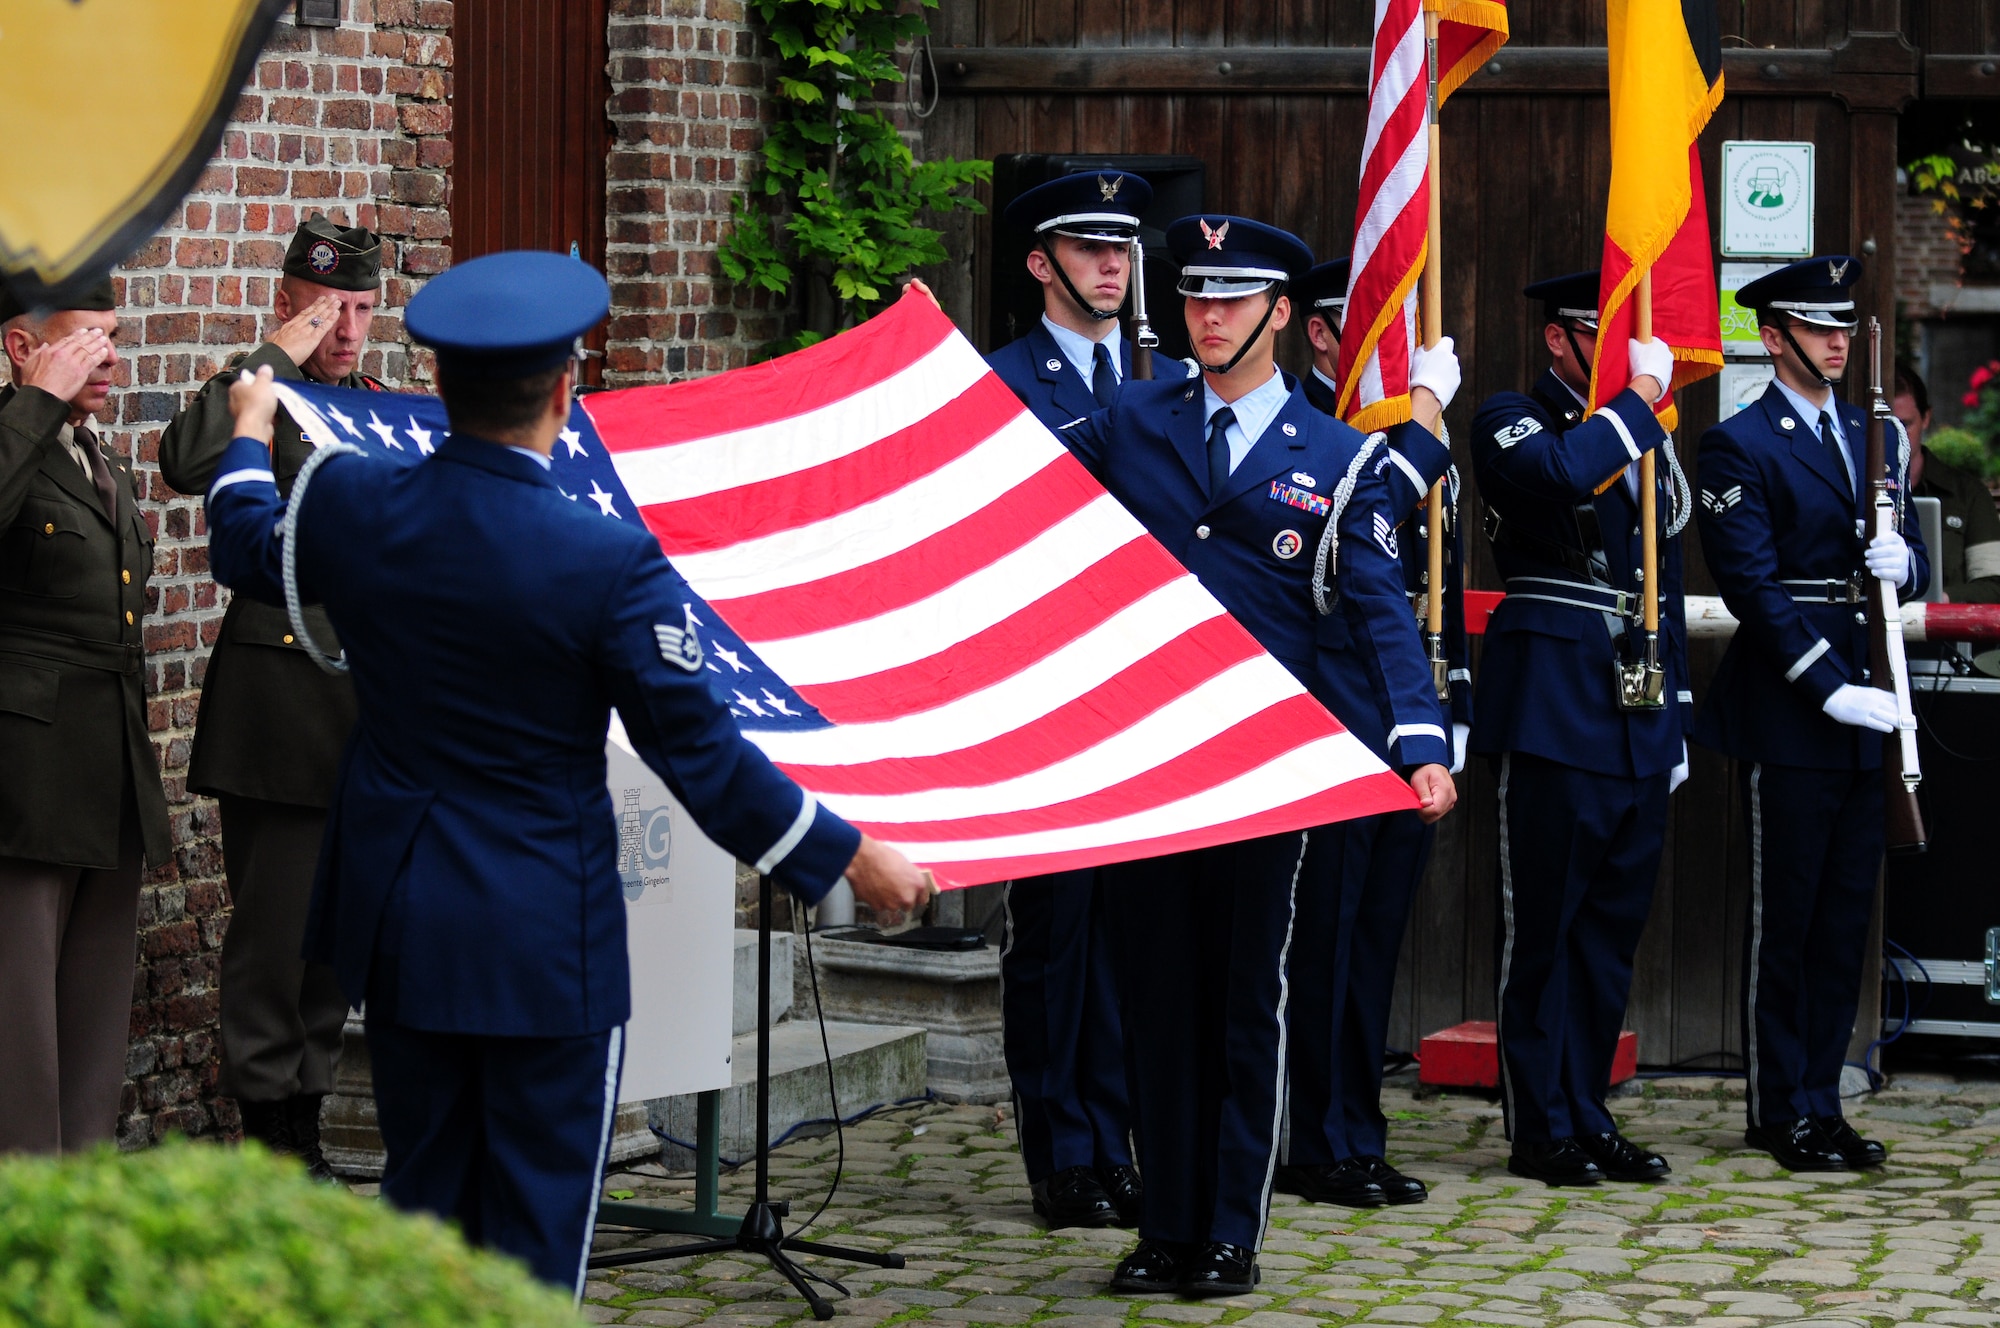 BORLO, Belgium – 52nd Fighter Wing Honor Guard members Staff Sgt. Victor Estupinan, left, and Staff Sgt. Charles Lopez perform a flag-folding ceremony during a Belgian 9-11 memorial here Sept. 11 U.S. service members and Belgian World War II Honor Guard Team members, along with the local community, participated in this ceremony as part of the Belgian Open Monument Day in remembrance of the victims of the Sept. 11, 2001 terrorist attacks on the United States. (U.S. Air Force photo/Airman 1st Class Matthew B. Fredericks)